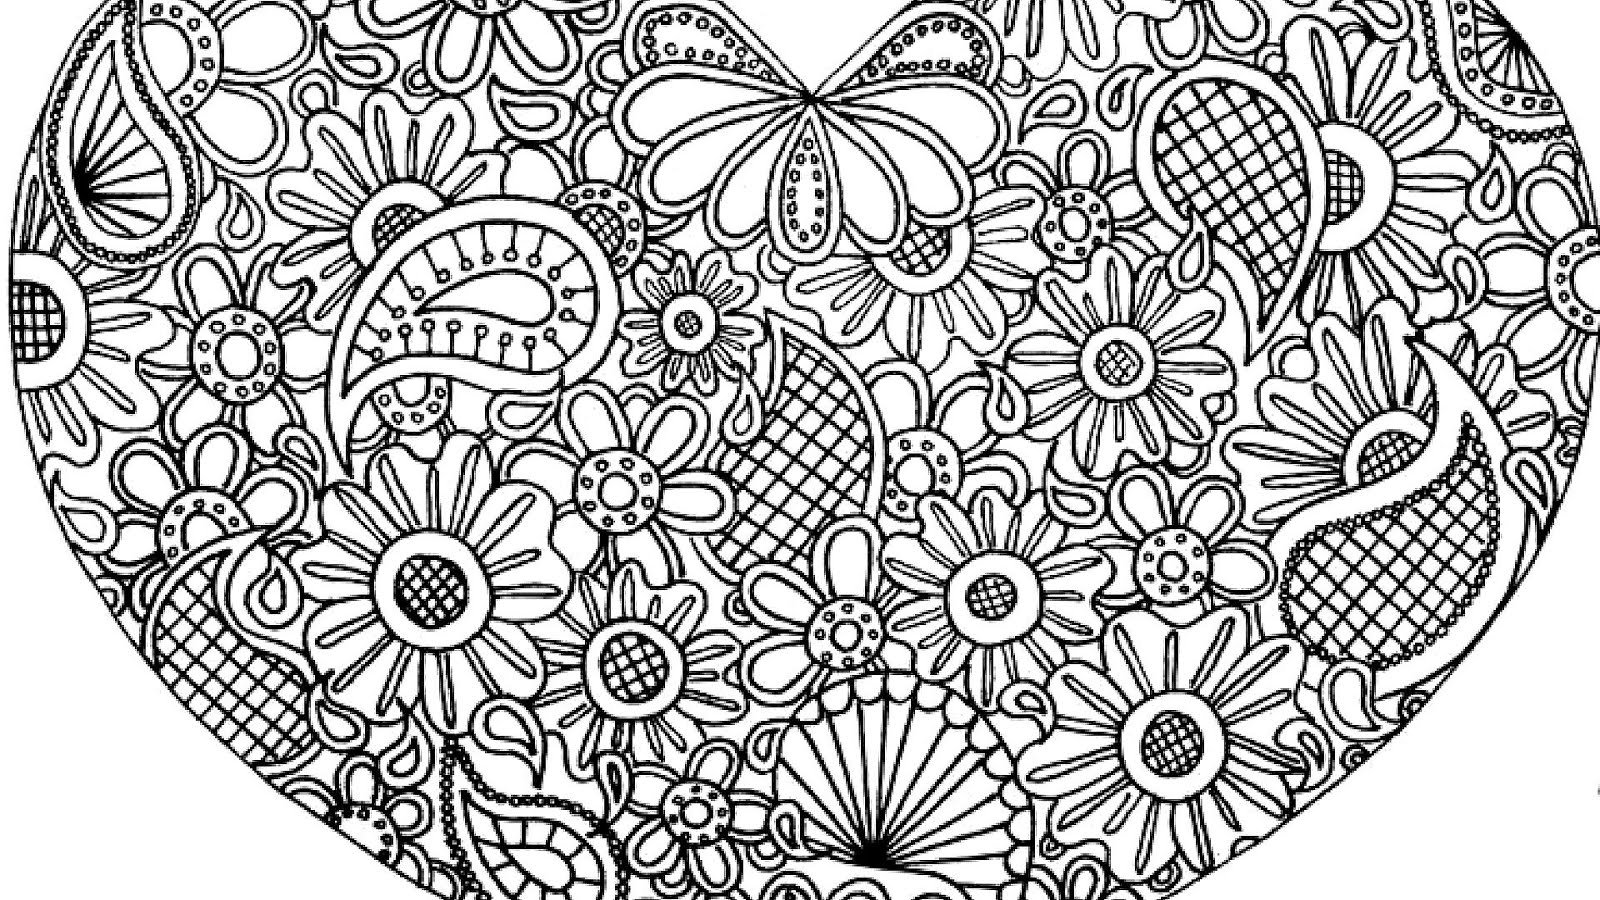 Printable Hearts Coloring Pages - Hear Choices